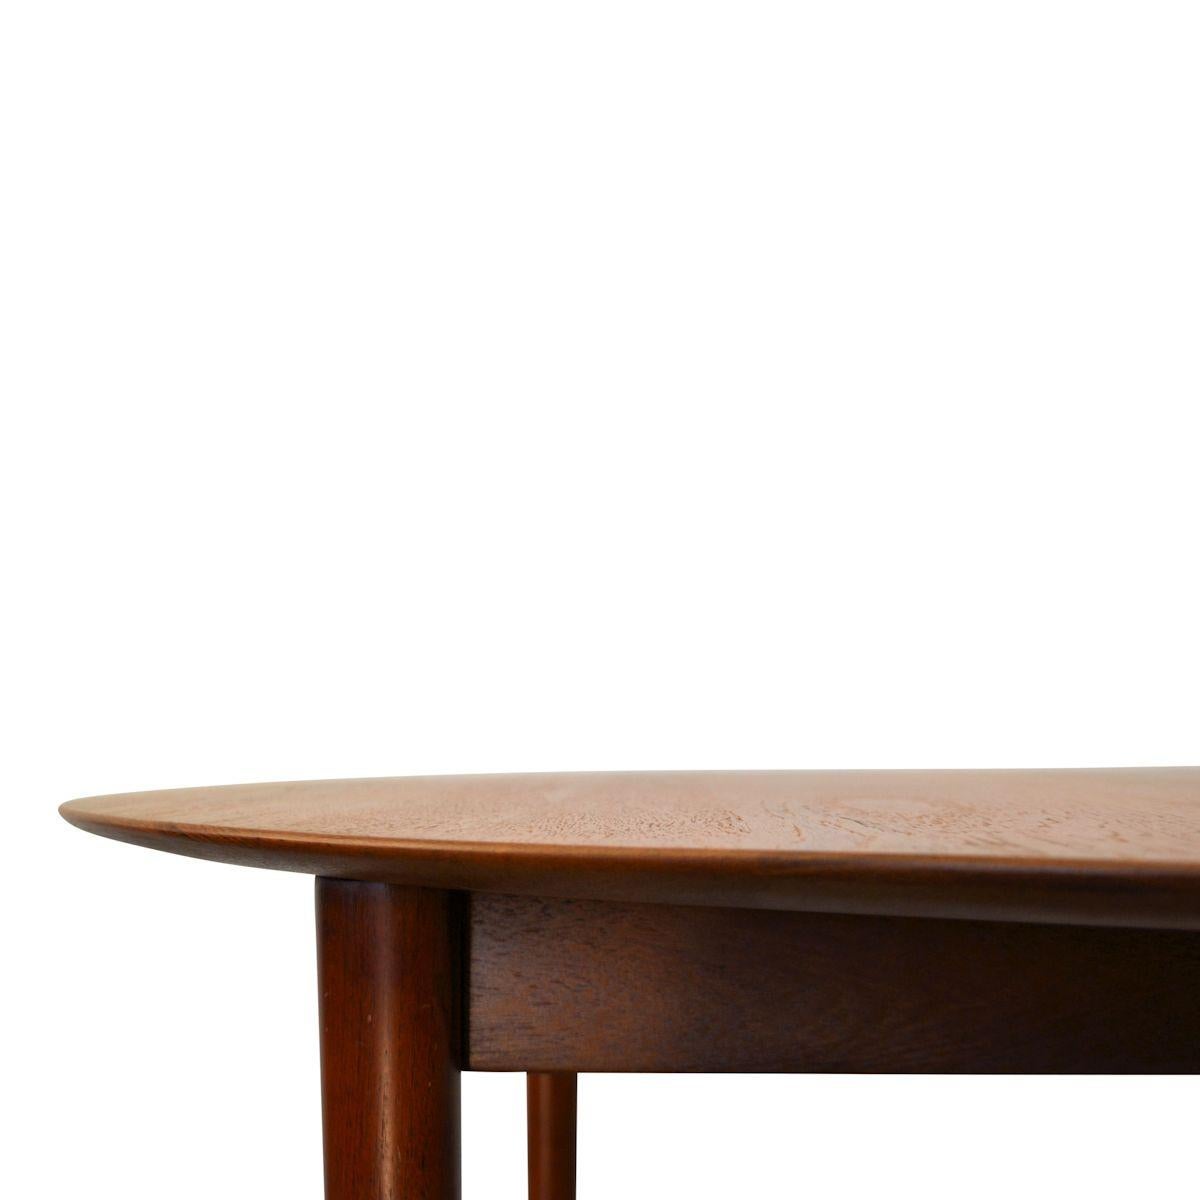 This vintage solid teak dining table, model 311, was designed by Peter Hvidt & Orla Mølgaard-Nielsen for Danish manufacturer Søborg Møbler. This Mid-Century Modern table extended by inserting the extra middle leaf into the elliptic shaped table top.